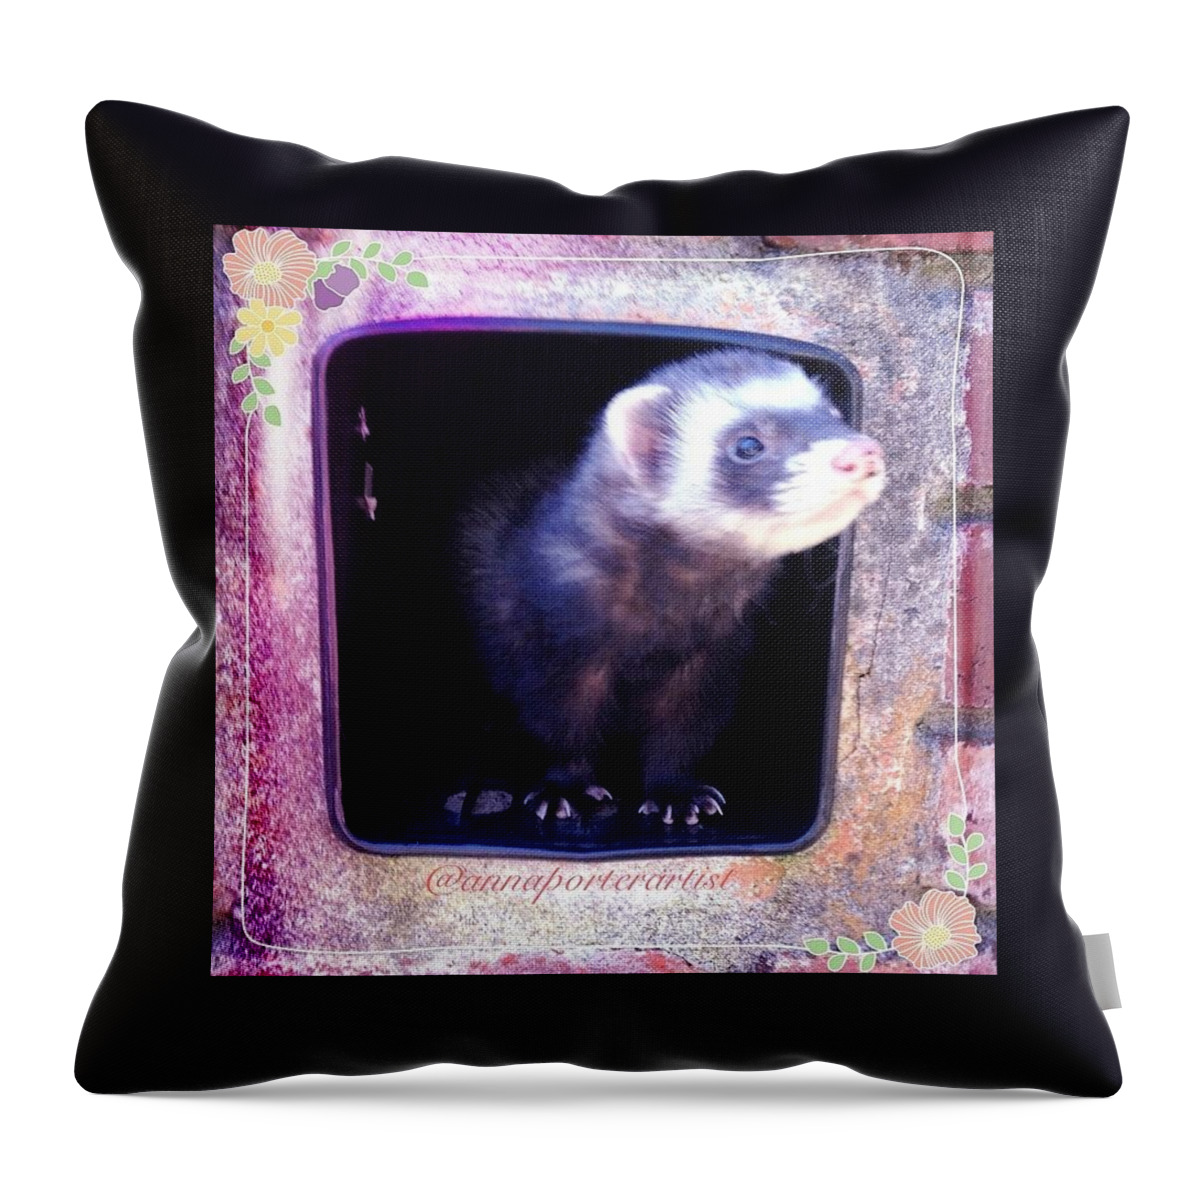 Airmail Ferret Throw Pillow featuring the photograph Airmail Ferret by Anna Porter